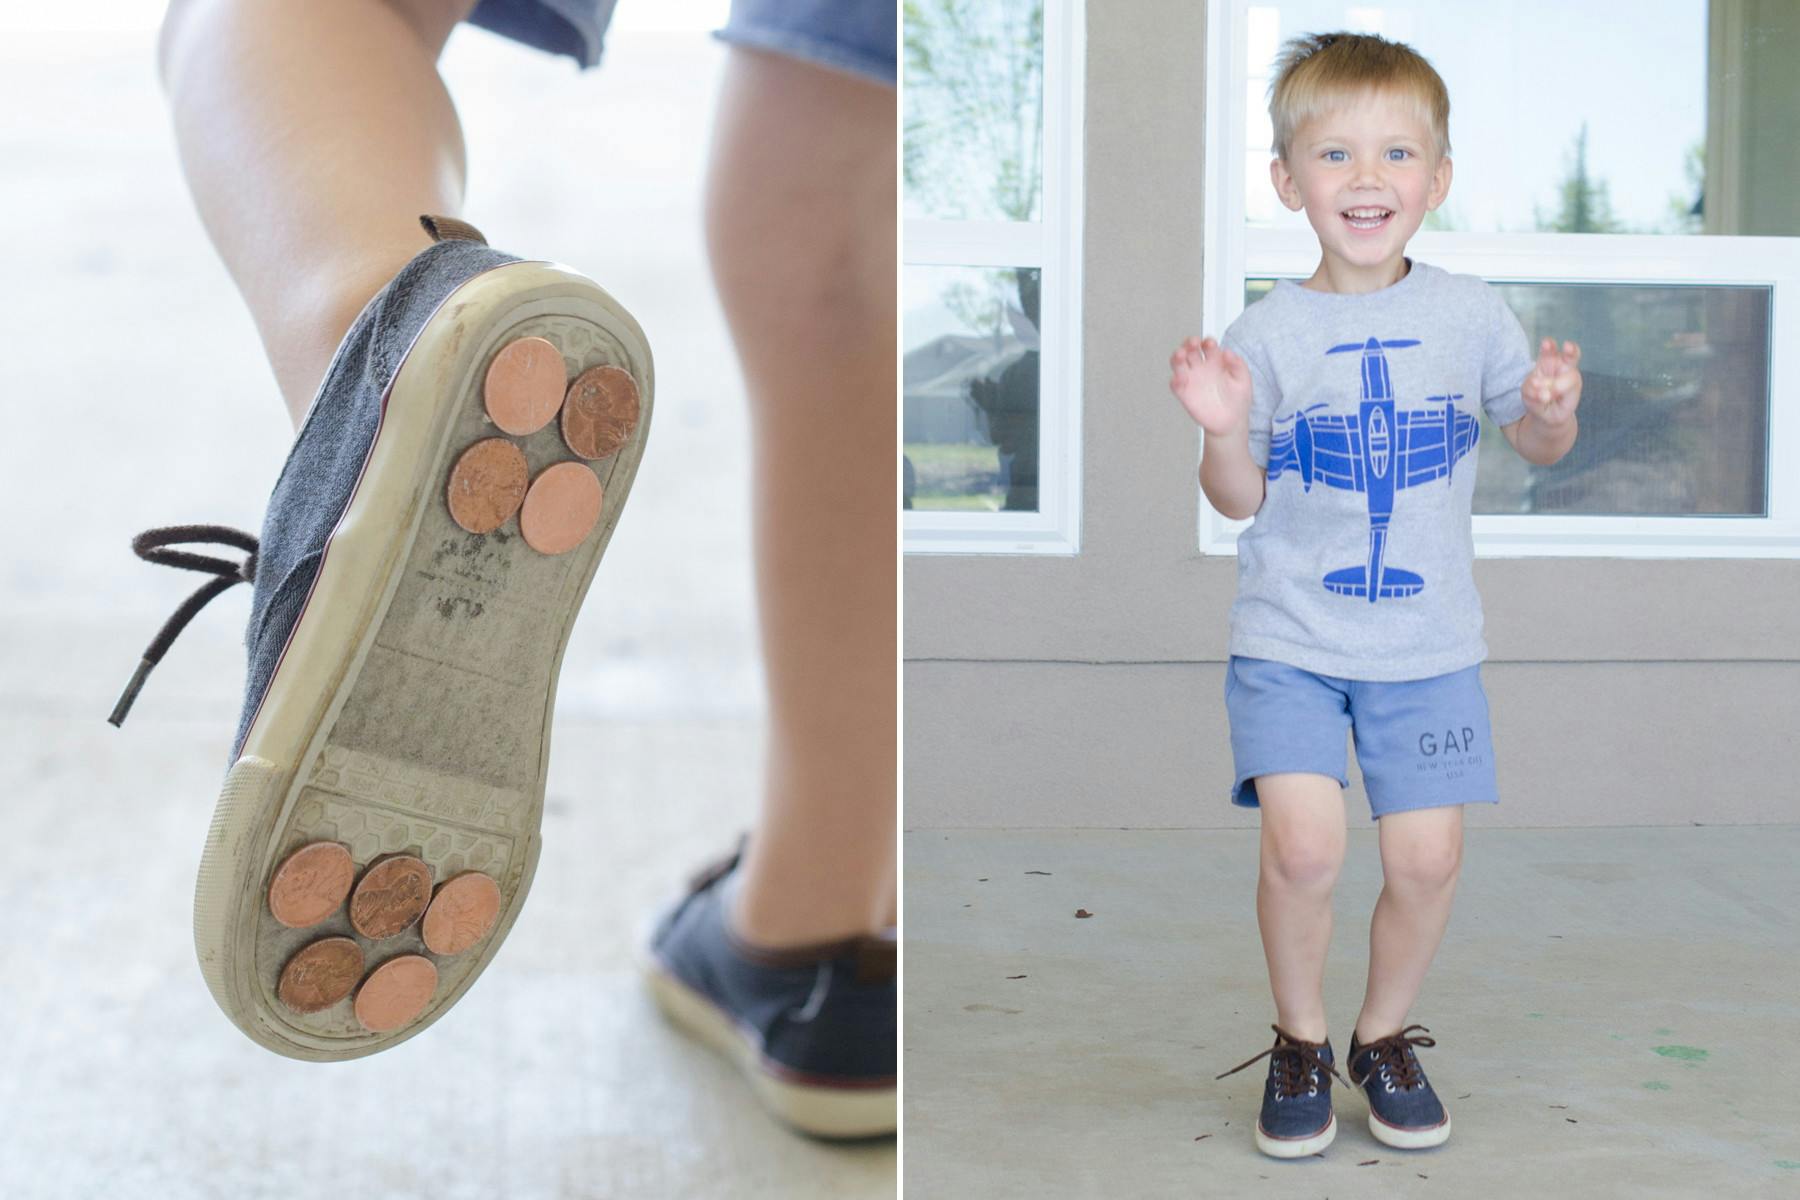 Pennies that have been stuck to the bottom of a kids shoe and a boy tapping with the shoes on.